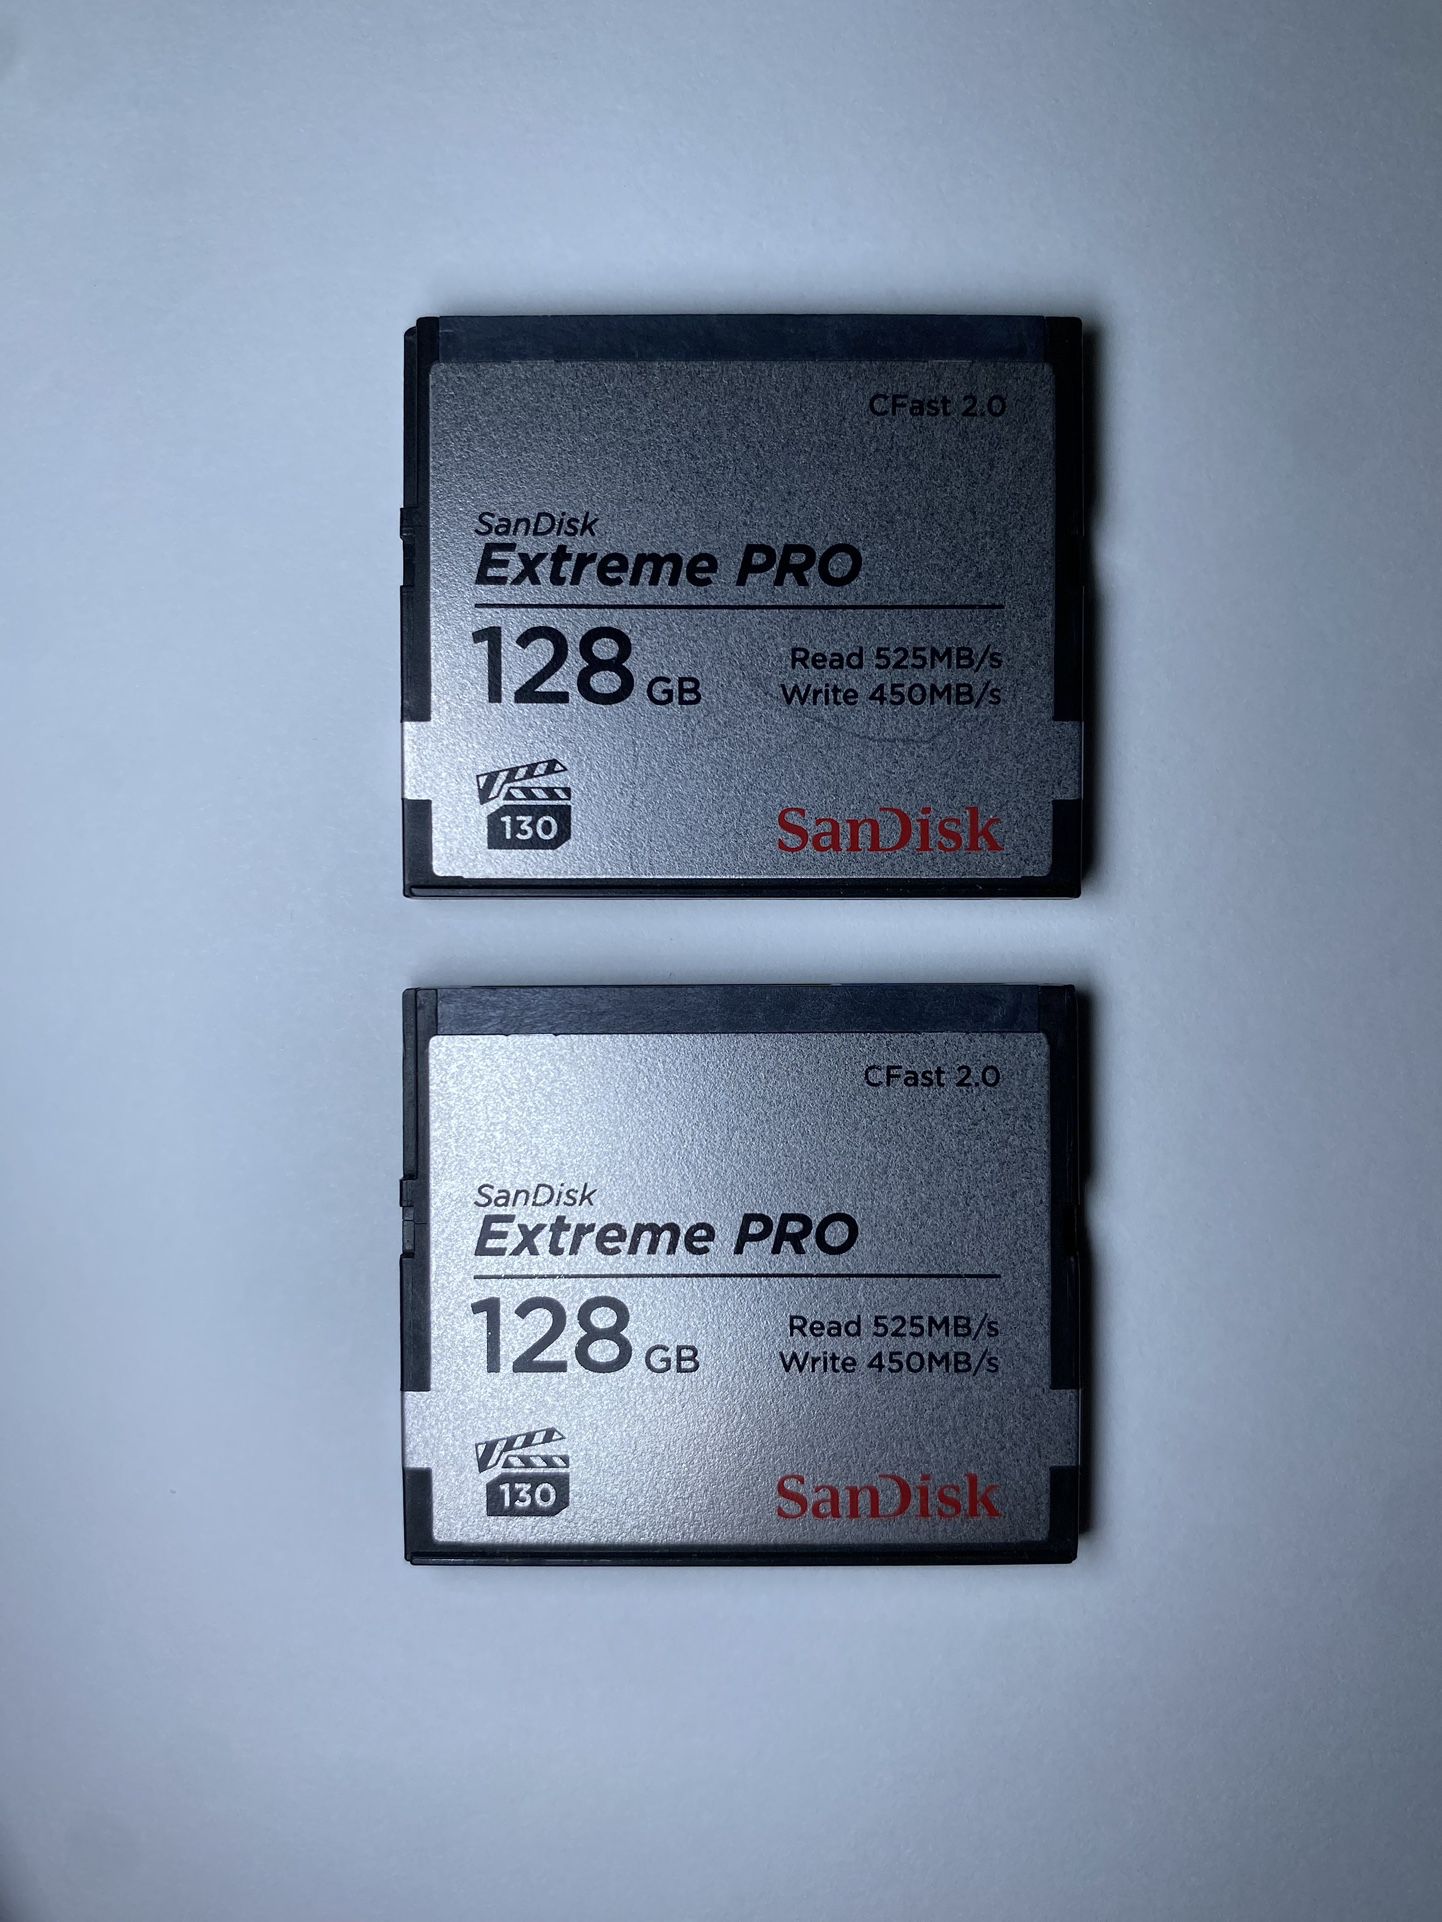 Sandisk Extreme PRO 128GB (x2) CFast 2.0 Memory Cards